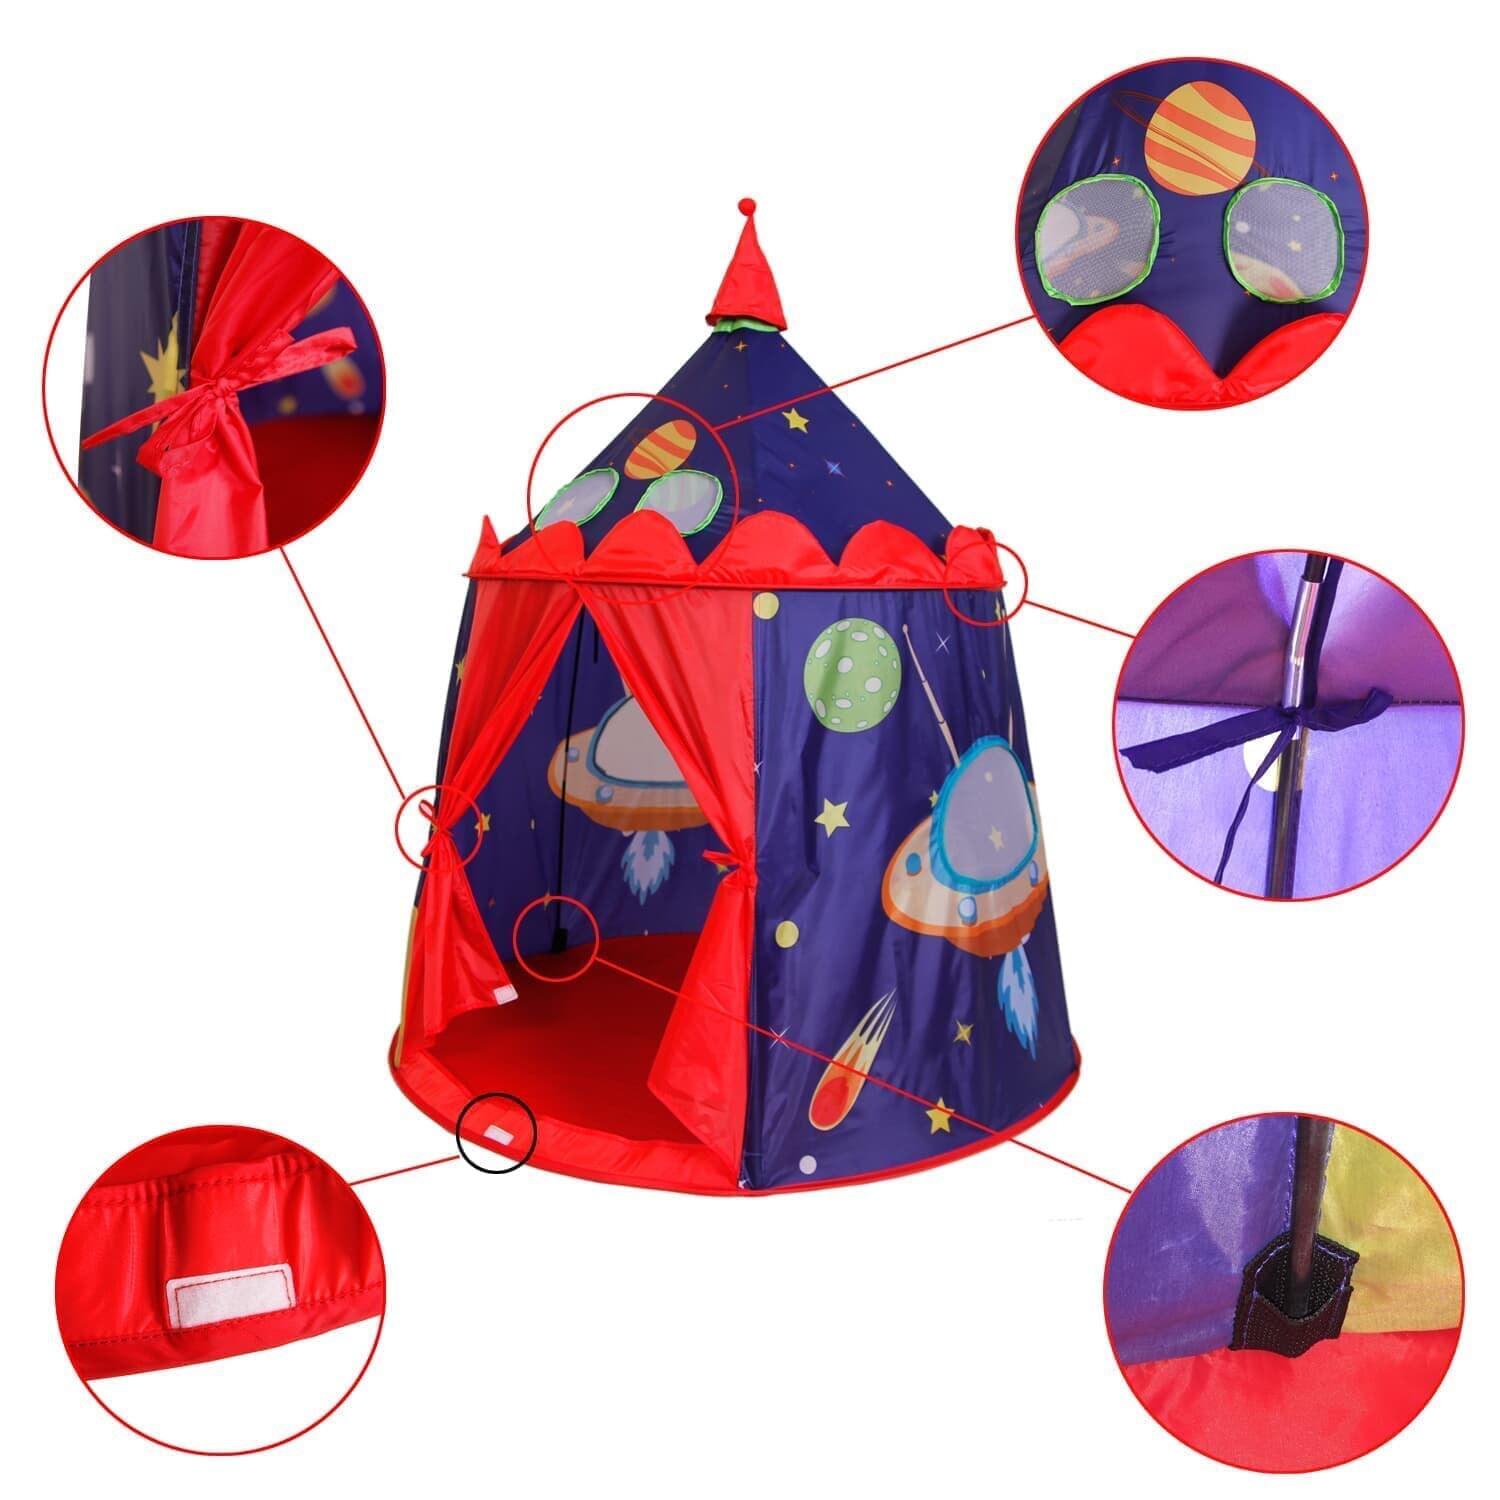 HOMFU Kids Indoor and Outdoor Tent Princess Prince Castle Children Play Tent and Portable Playhouse for Boys Girls baby toddlers children childrens  